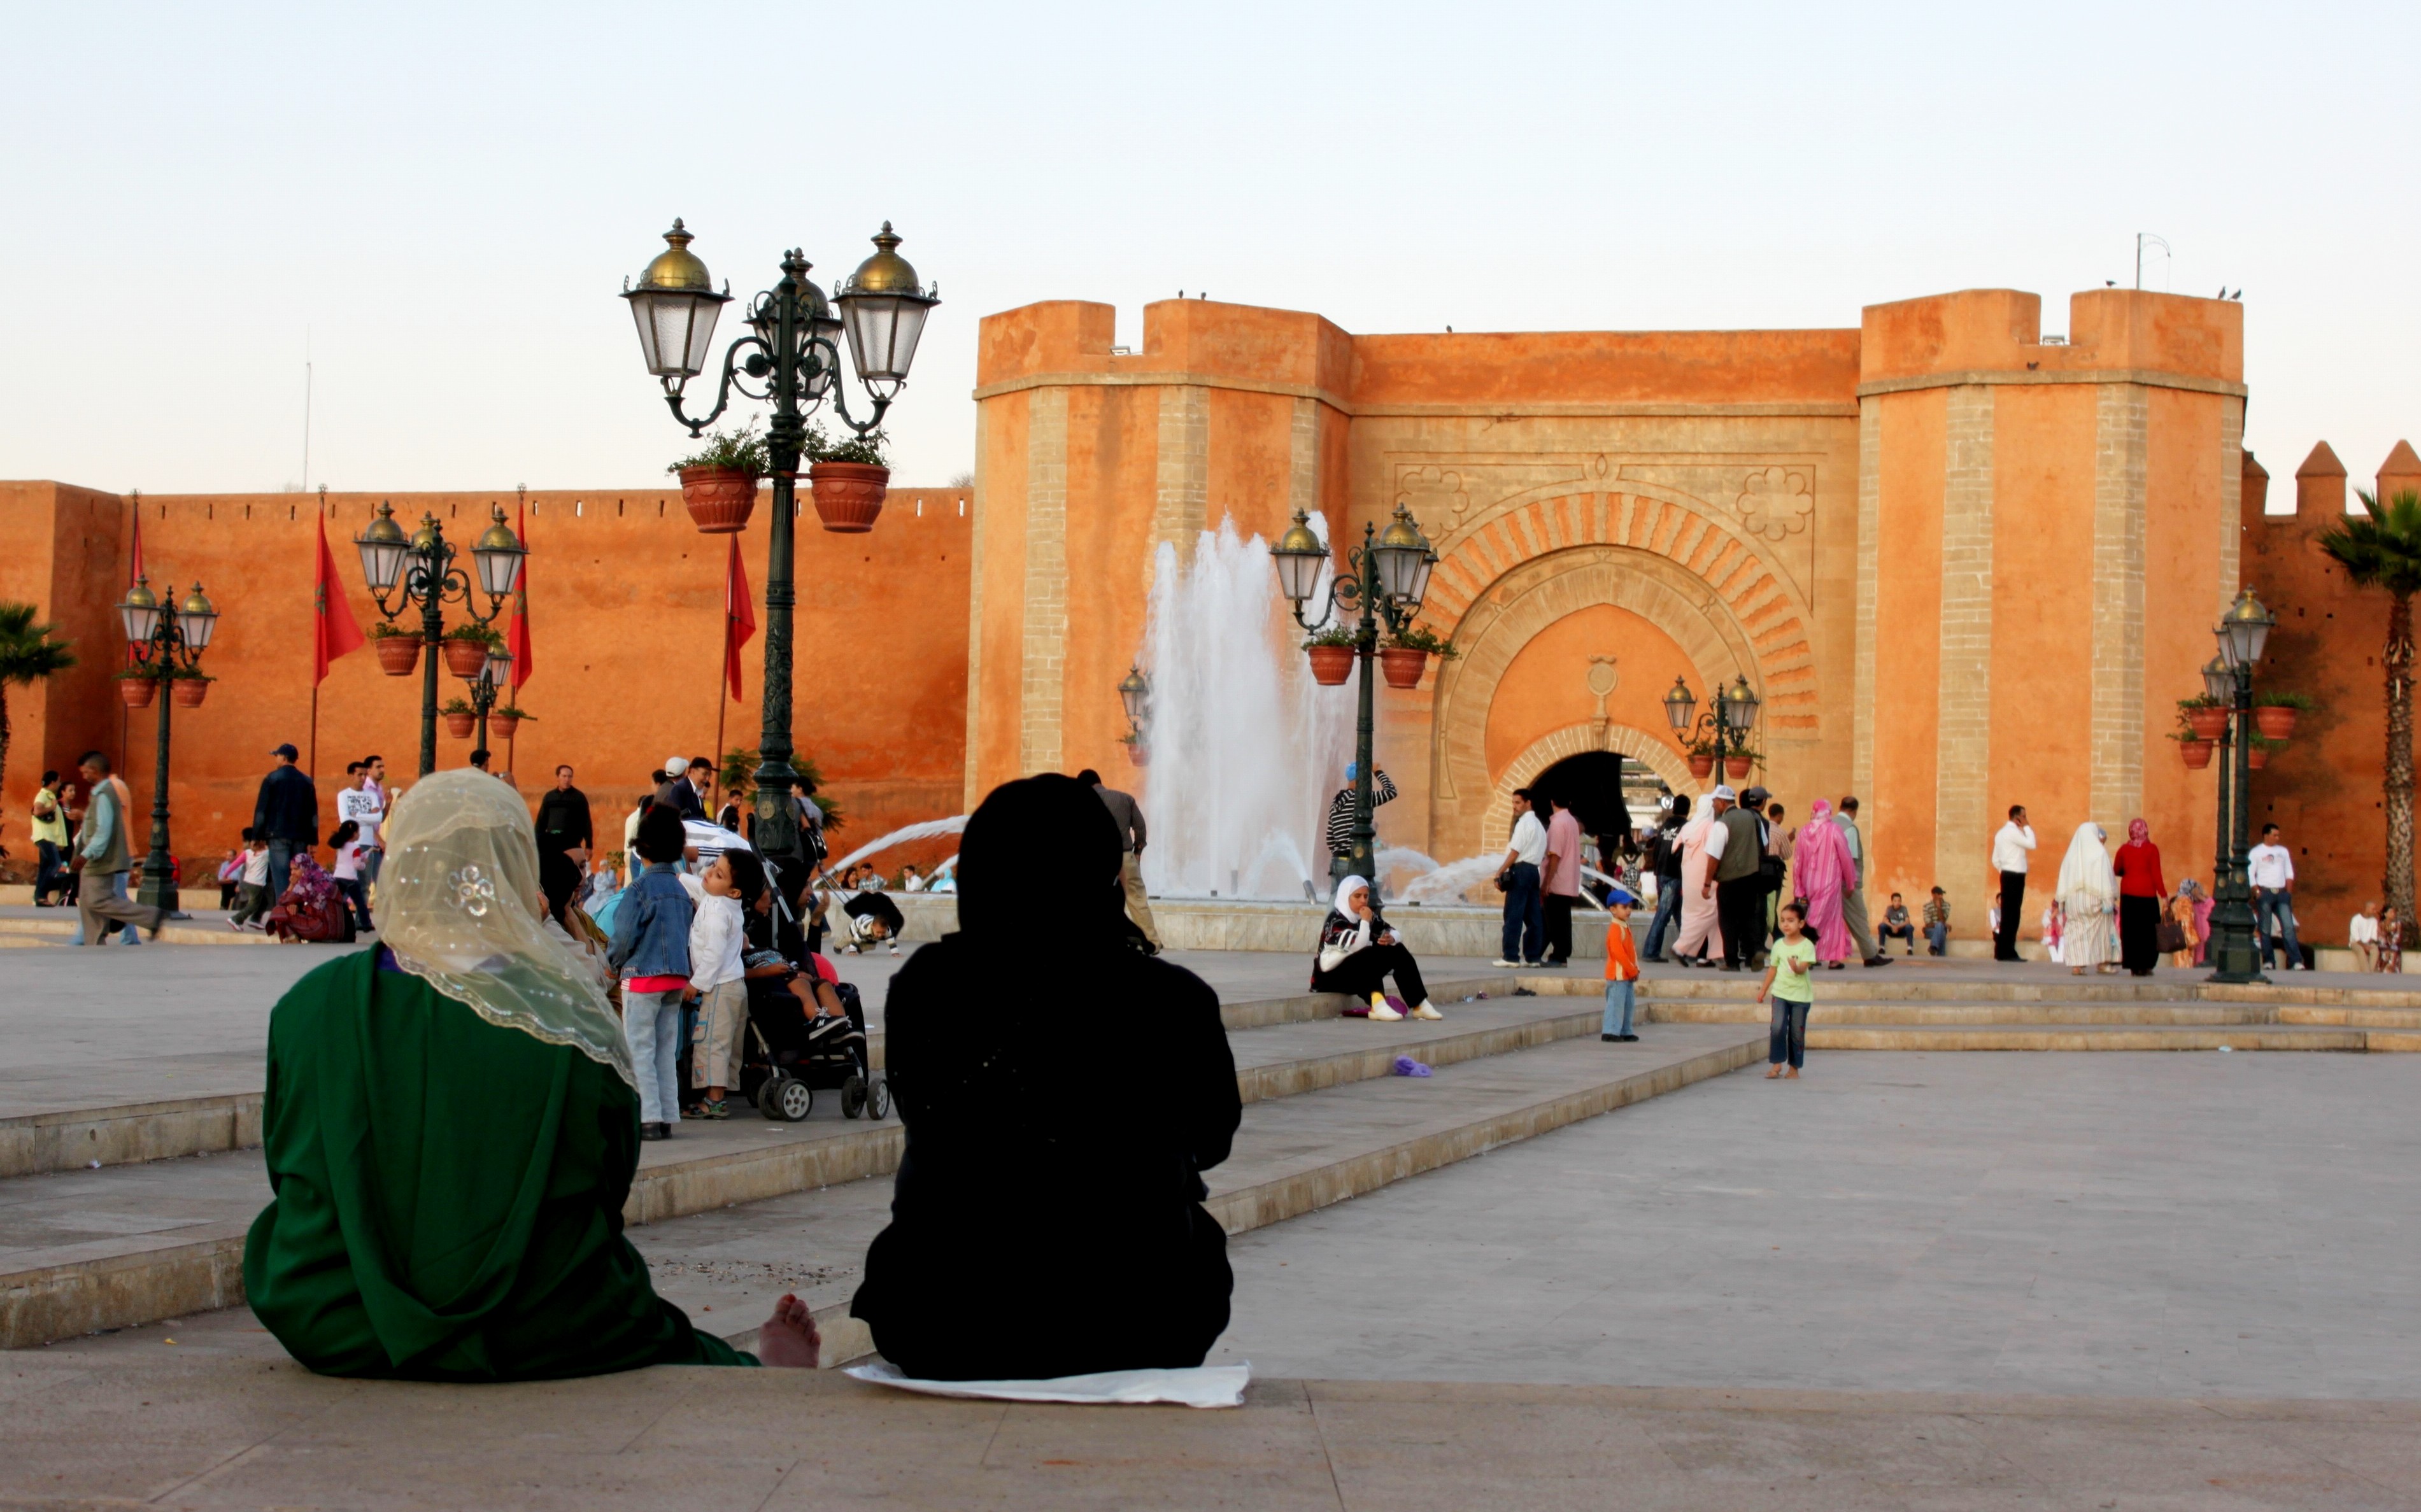 plaza square with two women sitting on ground